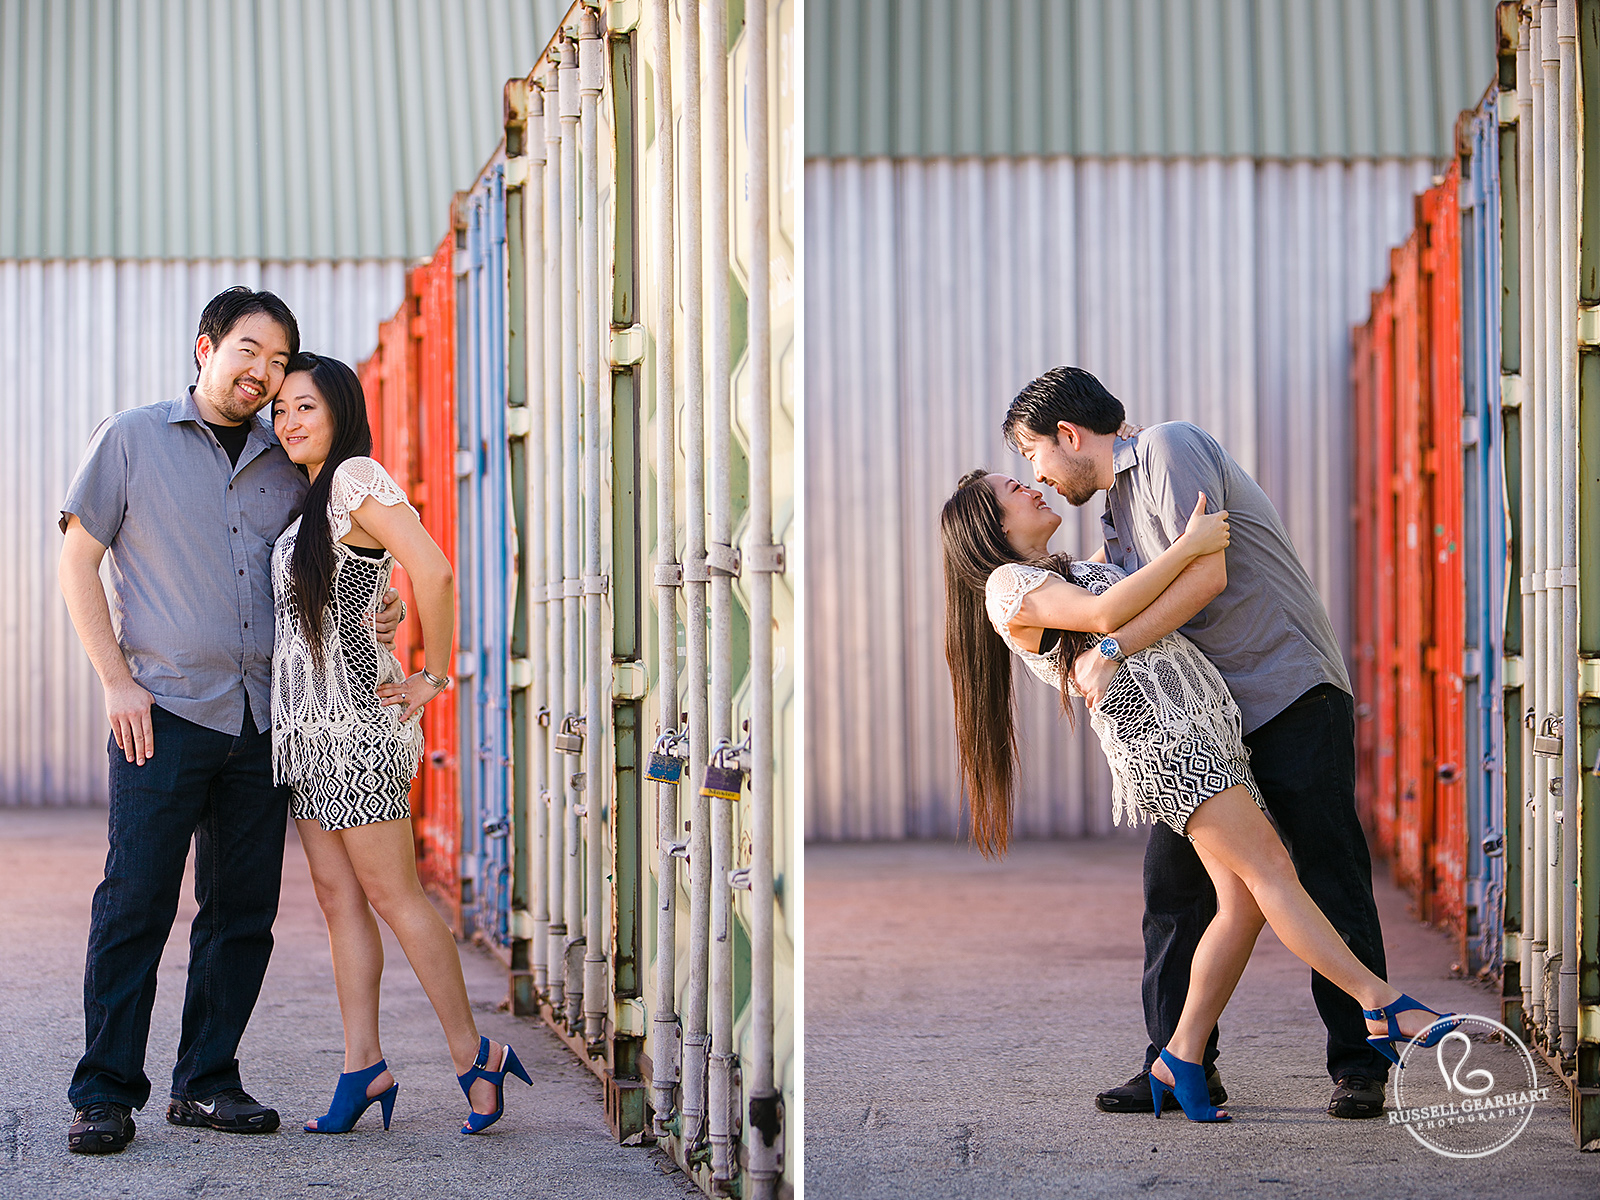 Los Angeles Industrial Engagement Session – Russell Gearhart Photography – www.gearhartphoto.com